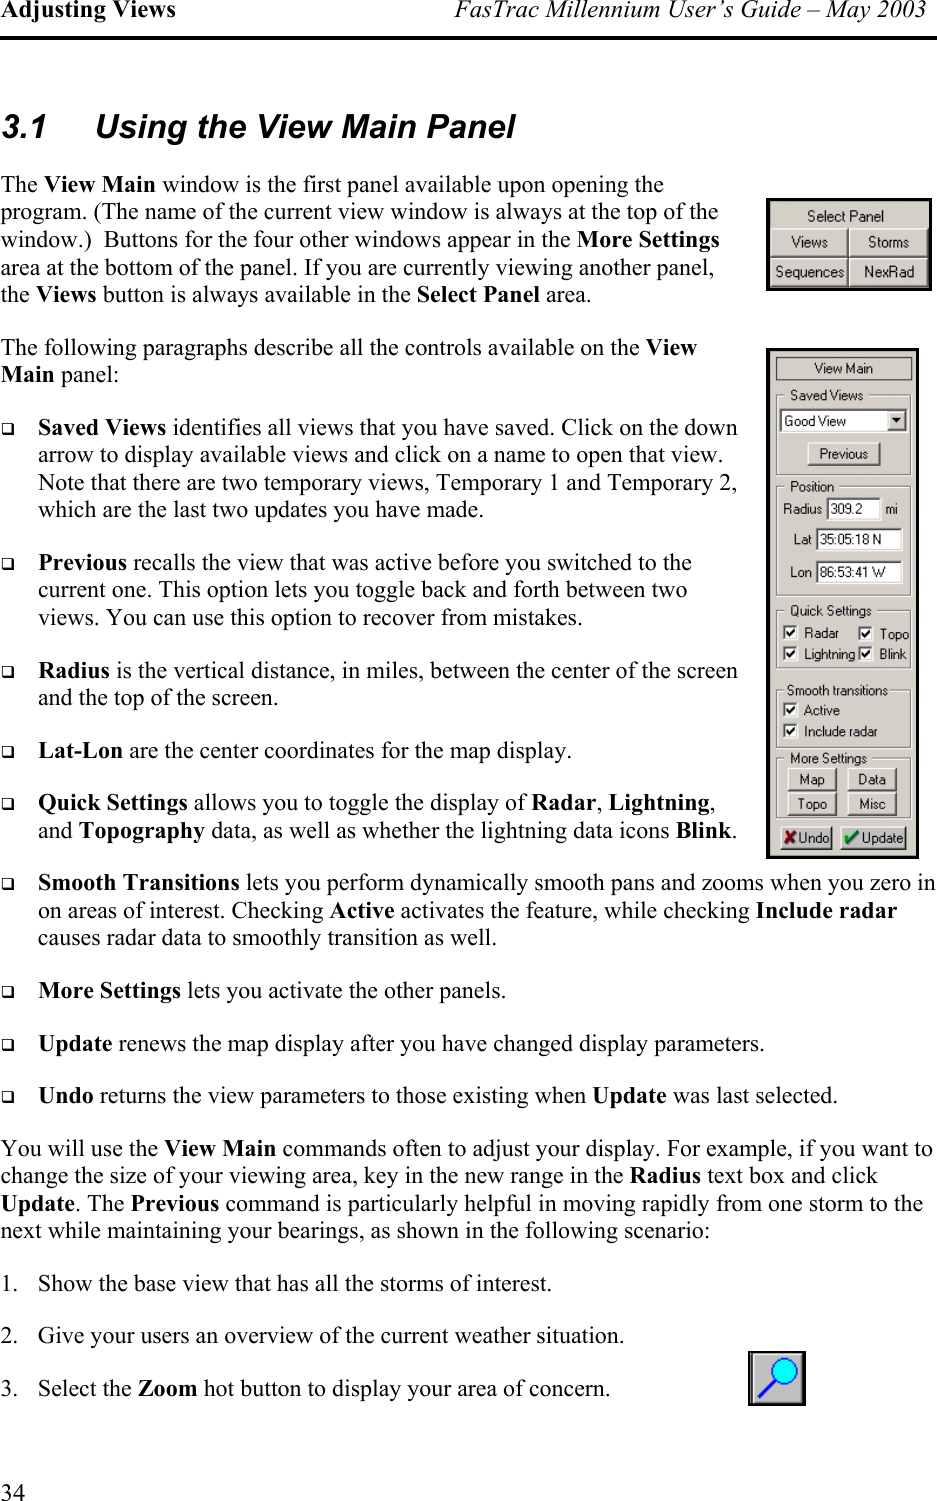 Adjusting Views  FasTrac Millennium User’s Guide – May 2003 3.1  Using the View Main Panel The View Main window is the first panel available upon opening the program. (The name of the current view window is always at the top of thewindow.)  Buttons for the four other windows appear in the More Settingsarea at the bottom of the panel. If you are currently viewing another panel, the Views button is always availabl  e in the Select Panel area. The following paragraphs describe all the controls available on the View Main panel:   Saved Views identifies all views that you have saved. Click on the down arrow to display available views and click on a name to open that view. Note that there are two temporary views, Temporary 1 and Temporary 2, which are the last two updates you have made.   Previous recalls the view that was active before you switched to the current one. This option lets you toggle back and forth between two views. You can use this option to recover from mistakes.   Radius is the vertical distance, in miles, between the center of the screen and the top of the screen.   Lat-Lon are the center coordinates for the map display.   Quick Settings allows you to toggle the display of Radar, Lightning, and Topography data, as well as whether the lightning data icons Blink.    Smooth Transitions lets you perform dynamically smooth pans and zooms when you zero in on areas of interest. Checking Active activates the feature, while checking Include radar causes radar data to smoothly transition as well.    More Settings lets you activate the other panels.   Update renews the map display after you have changed display parameters.   Undo returns the view parameters to those existing when Update was last selected. You will use the View Main commands often to adjust your display. For example, if you want to change the size of your viewing area, key in the new range in the Radius text box and click Update. The Previous command is particularly helpful in moving rapidly from one storm to the next while maintaining your bearings, as shown in the following scenario: 1.  Show the base view that has all the storms of interest. 2.  Give your users an overview of the current weather situation. 3. Select the Zoom hot button to display your area of concern. 34 